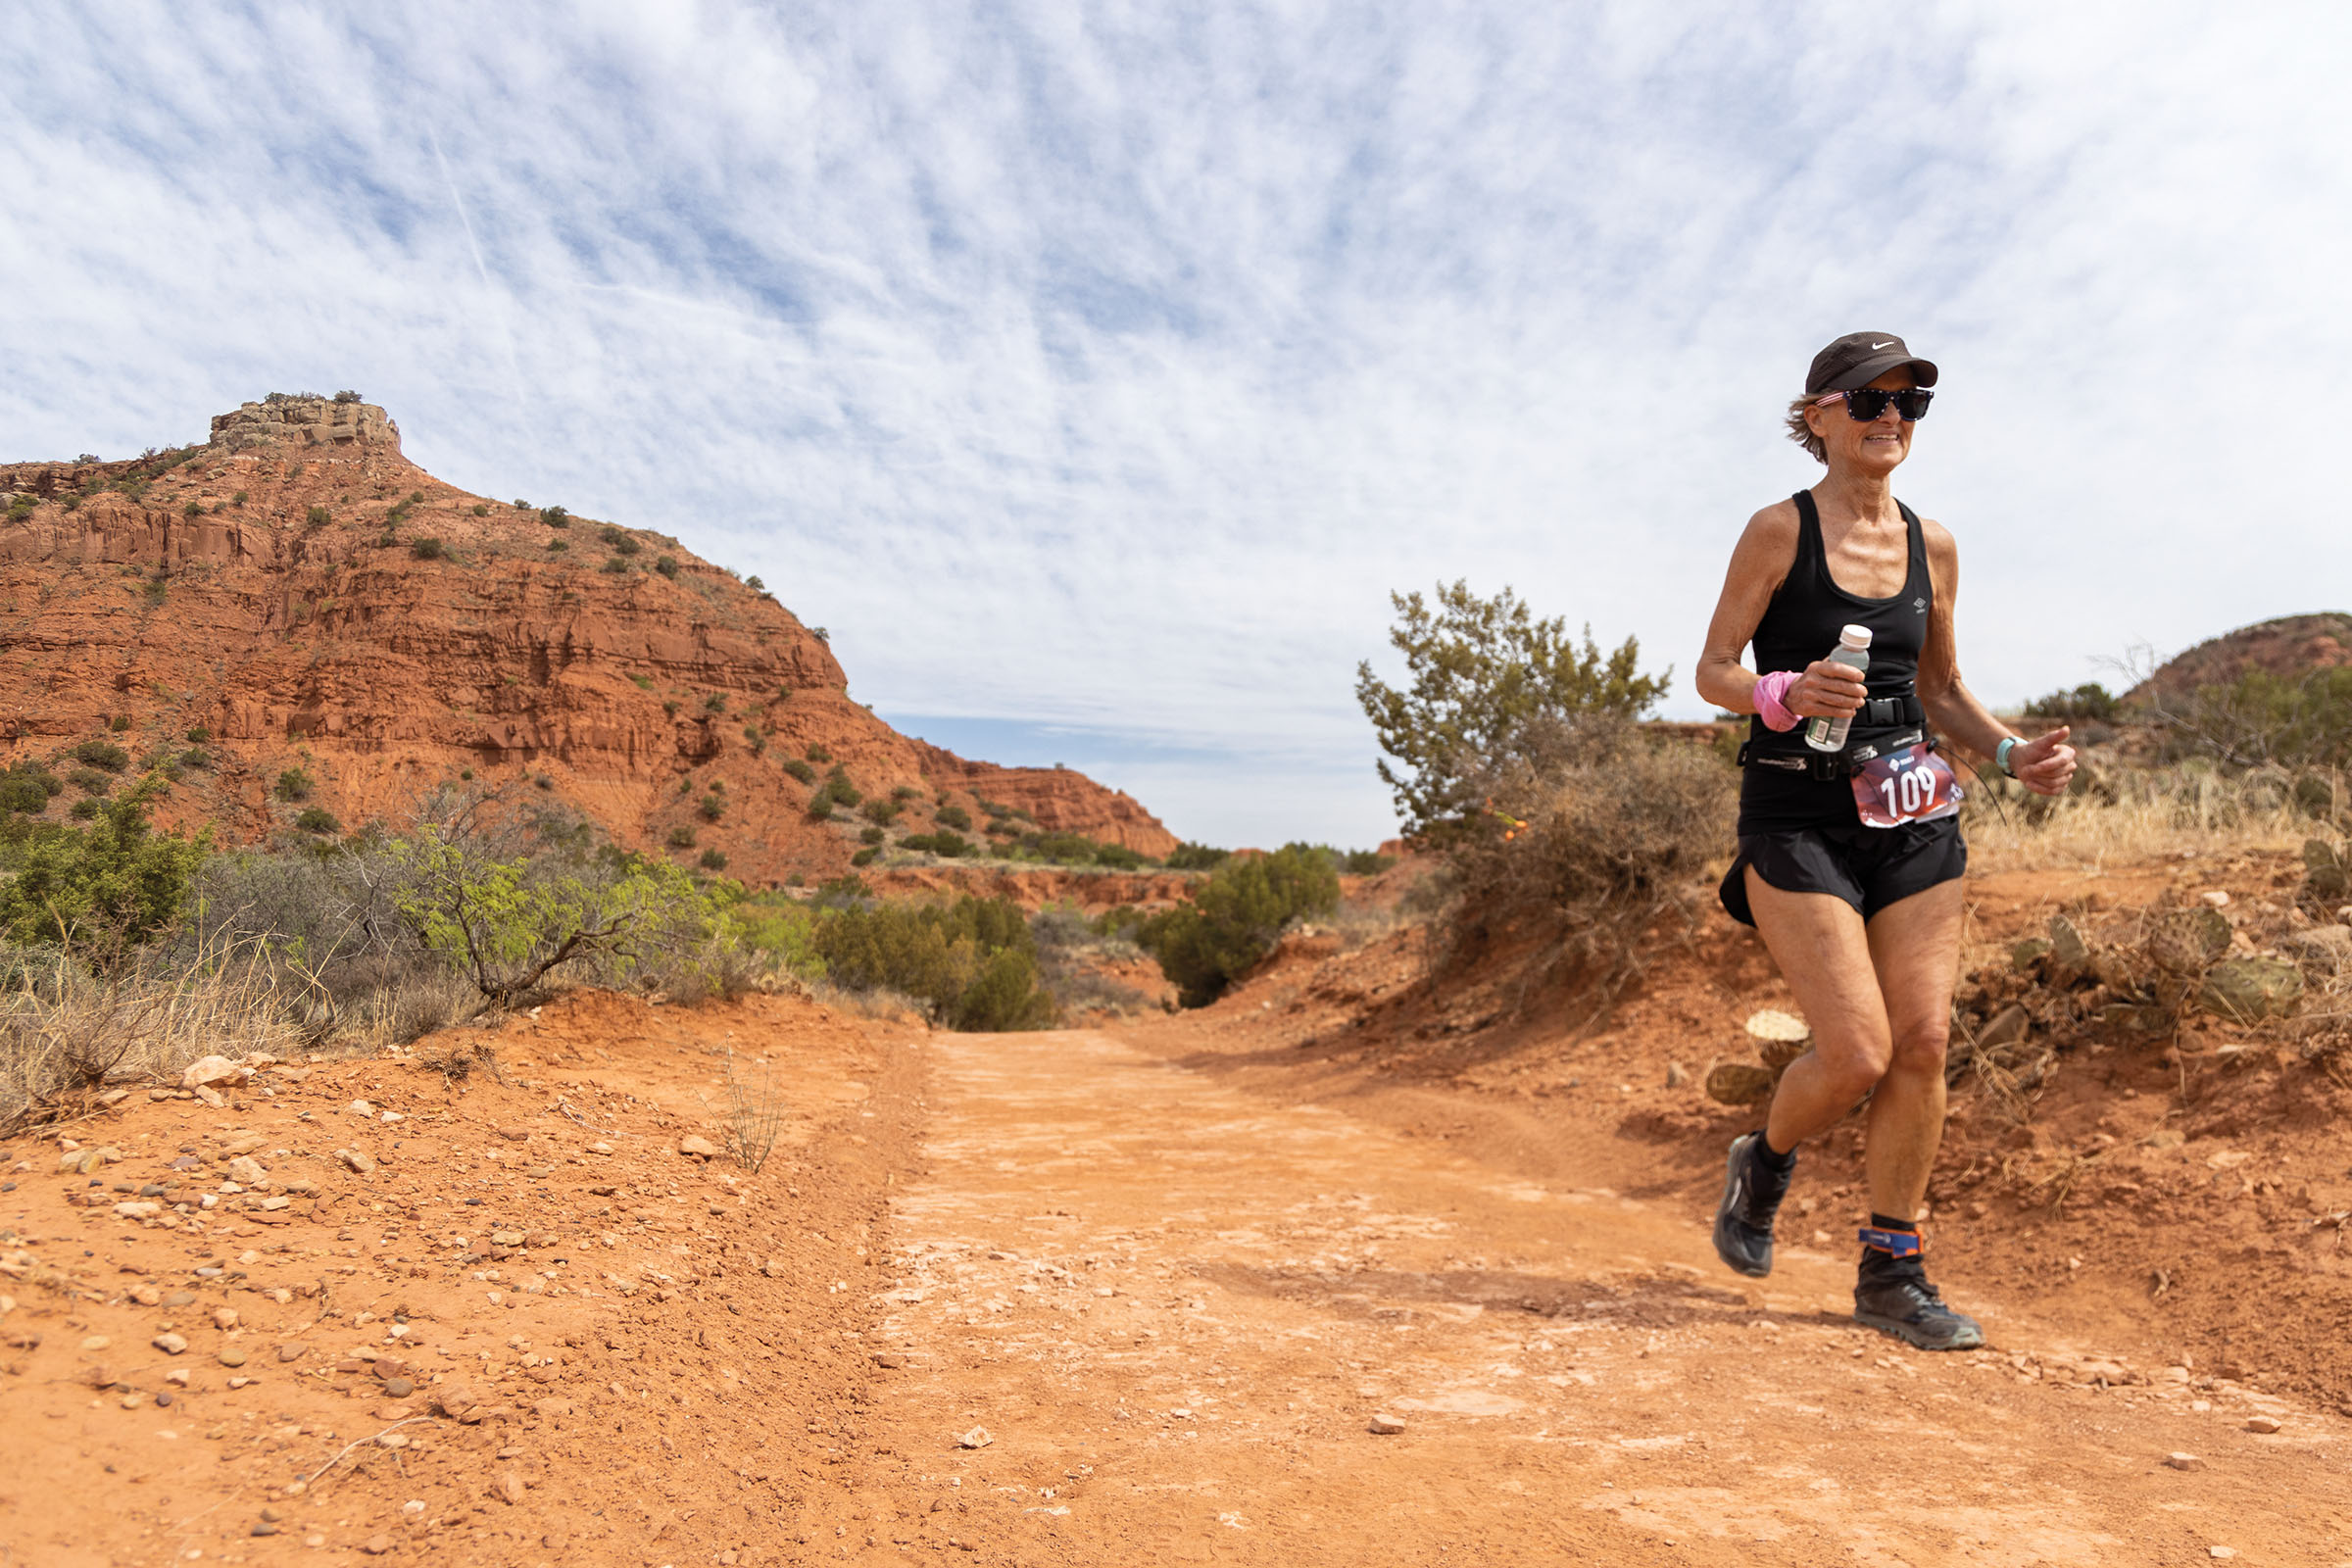 A woman in a black tank top and hat runs along a rugged dirt trail with canyons in the background